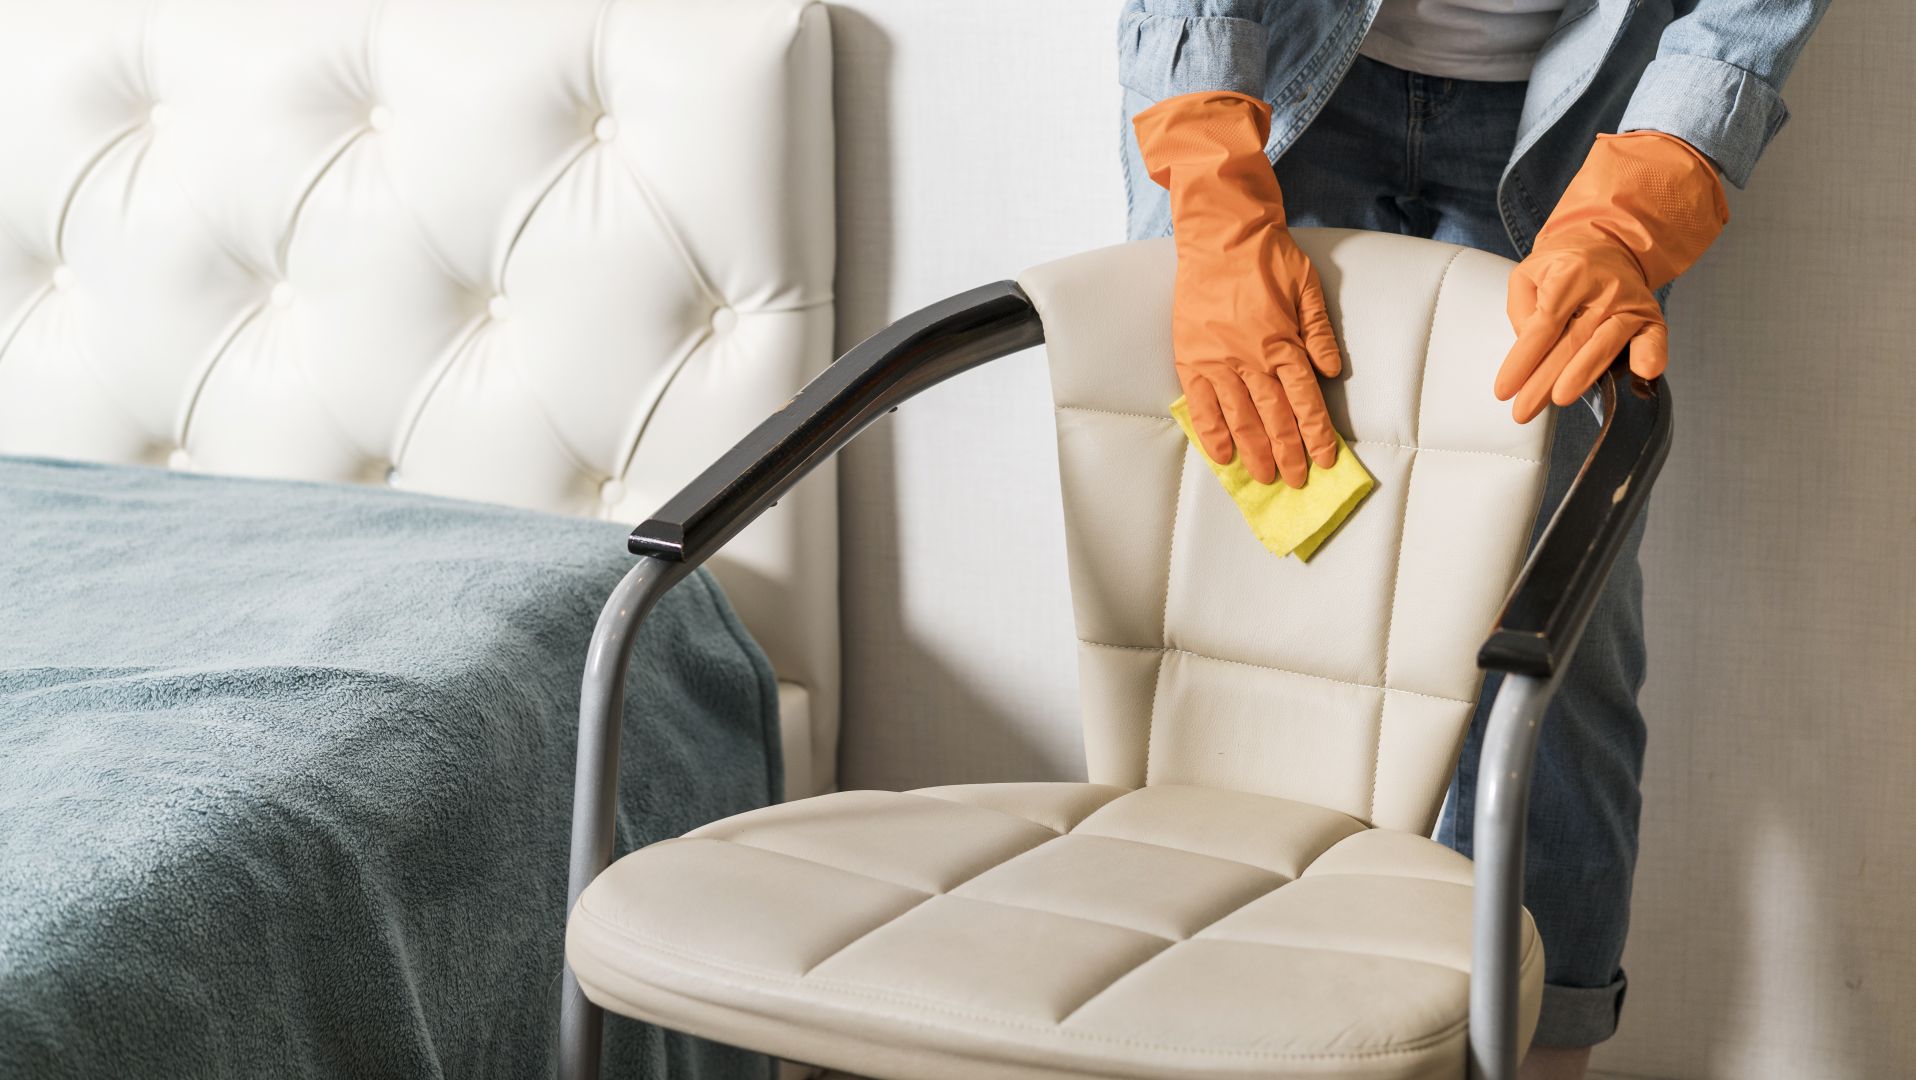 How often should an office schedule chair cleaning services?